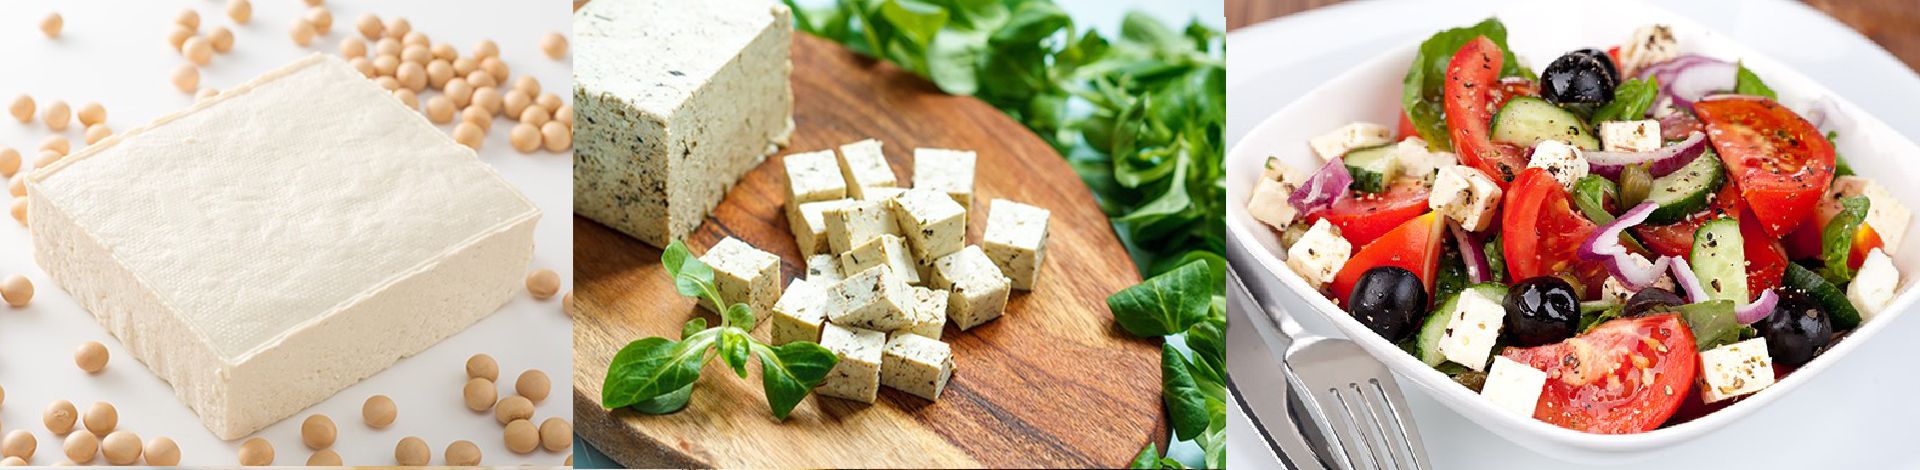 Join us you will find making tofu is so easy